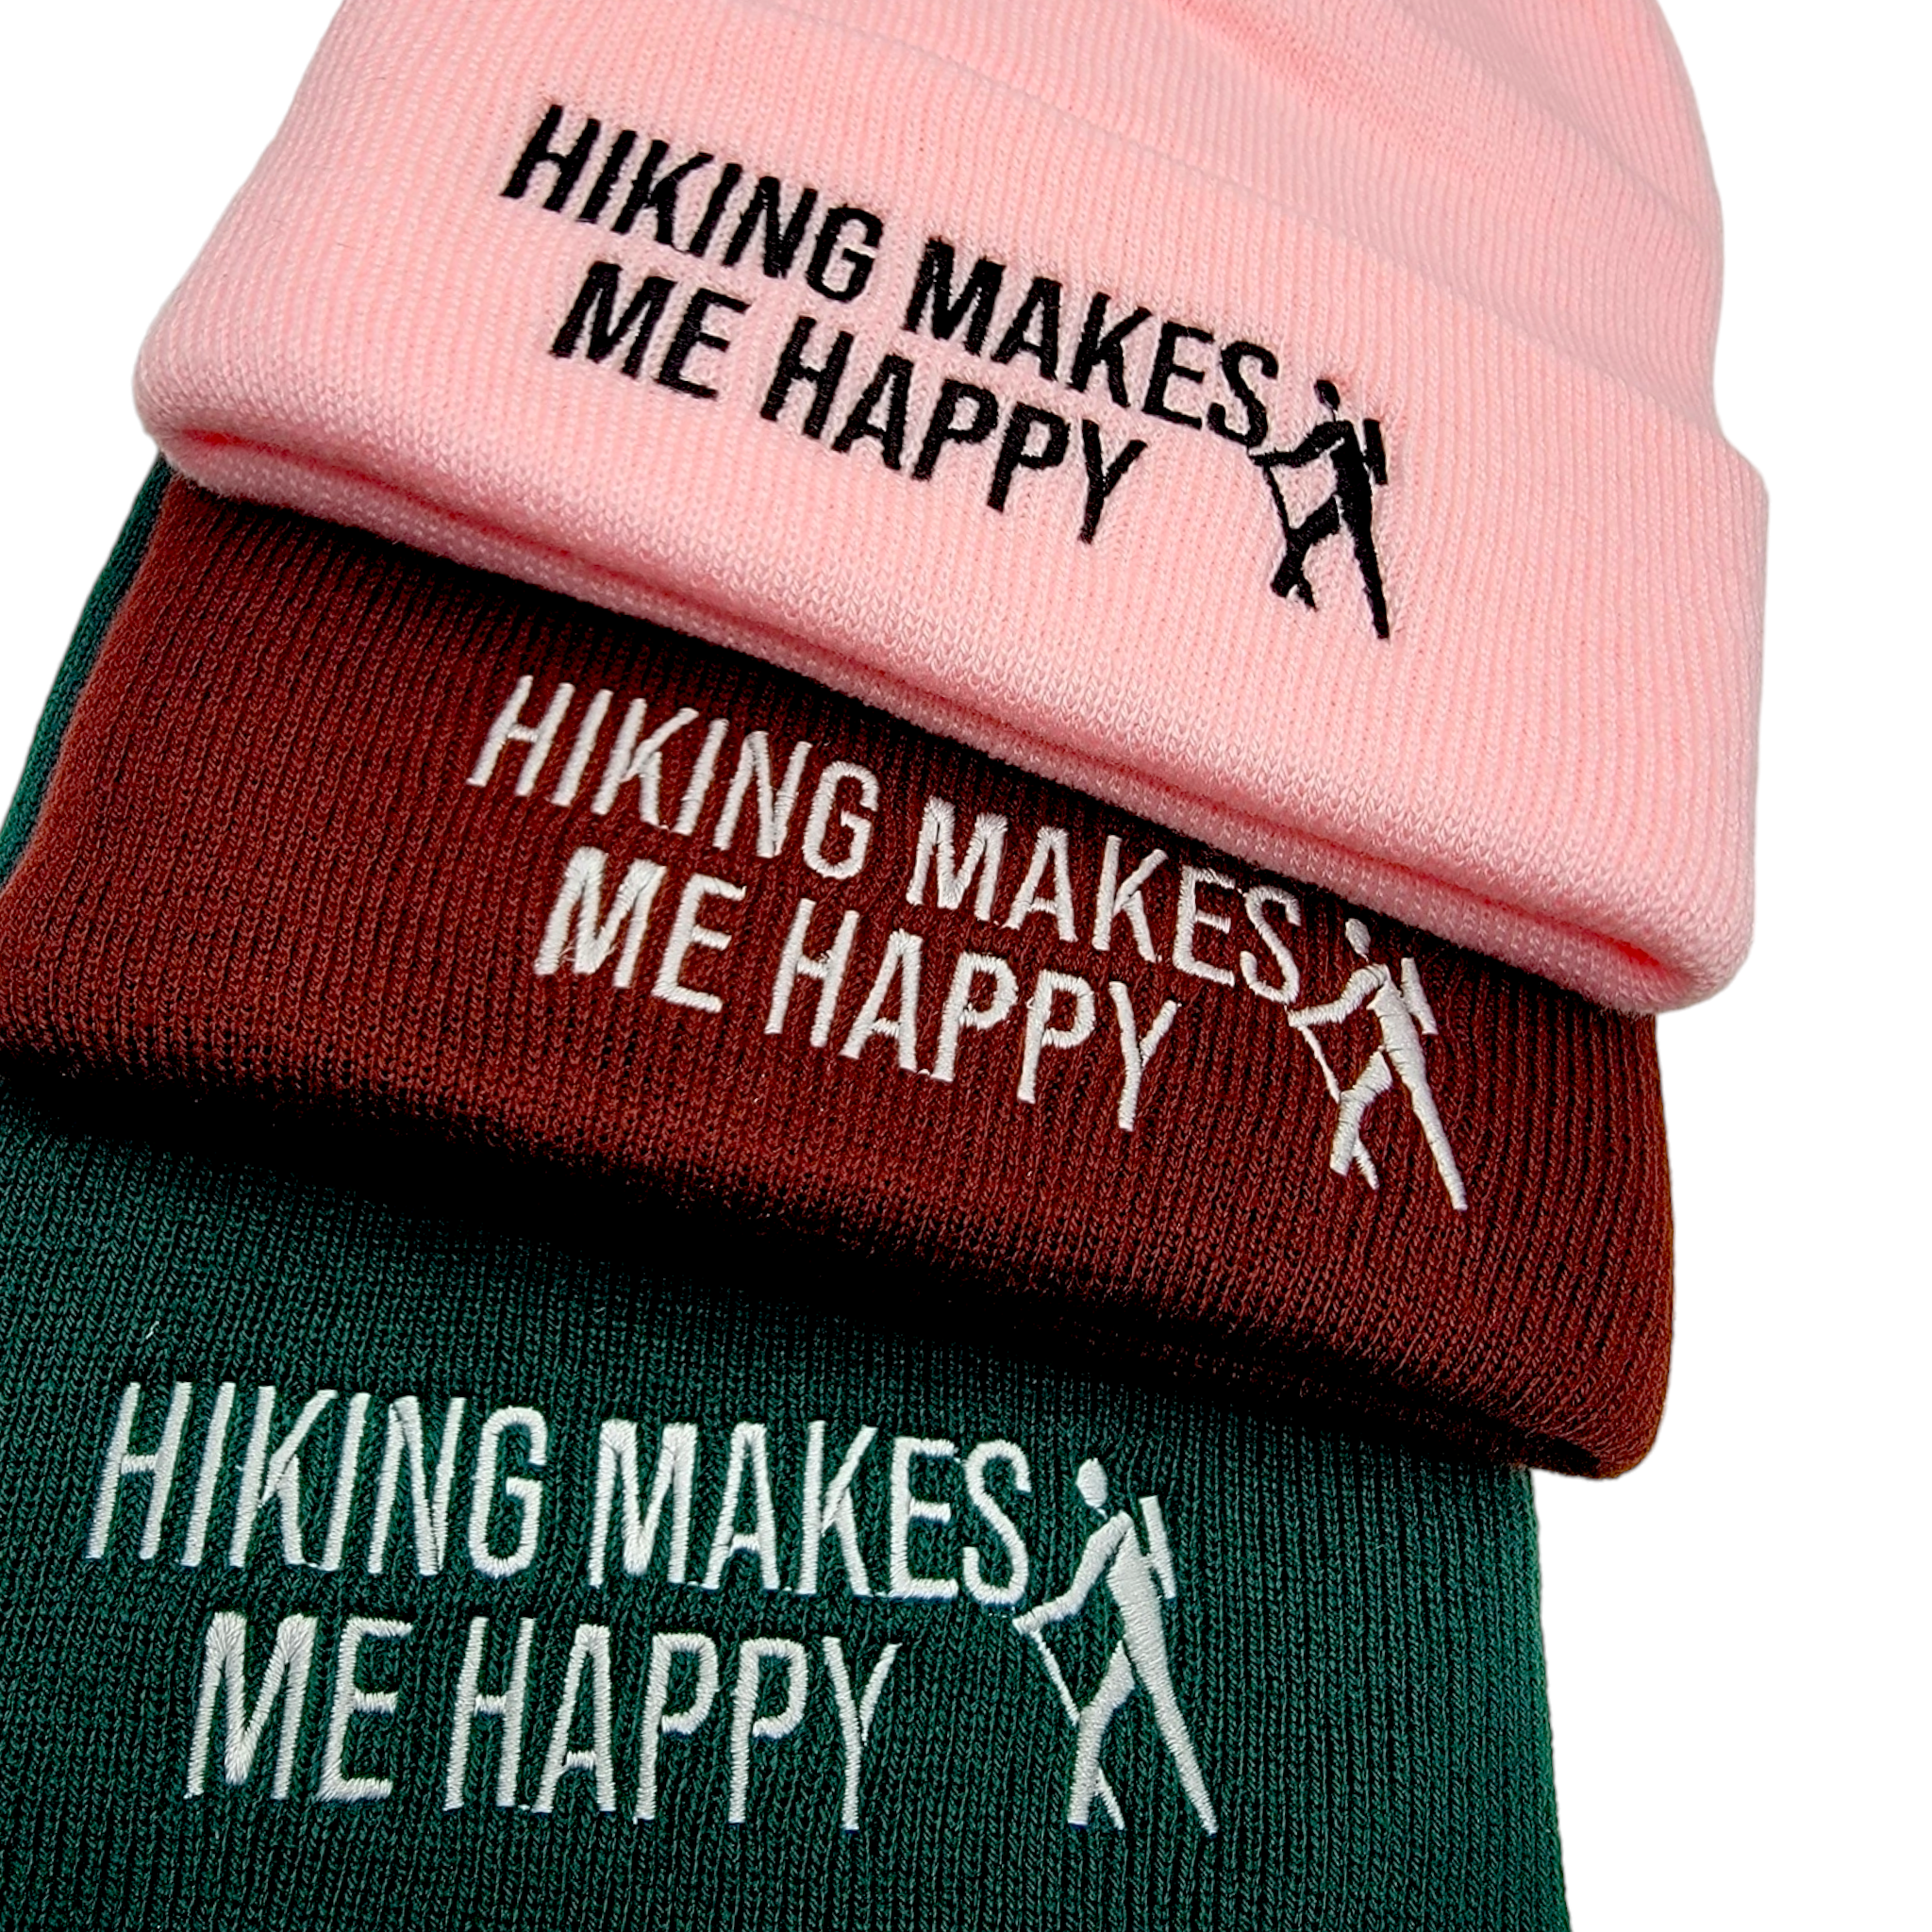 "Hiking makes me happy" - Adult Beanie - 4 colors - Travelers Trade Post